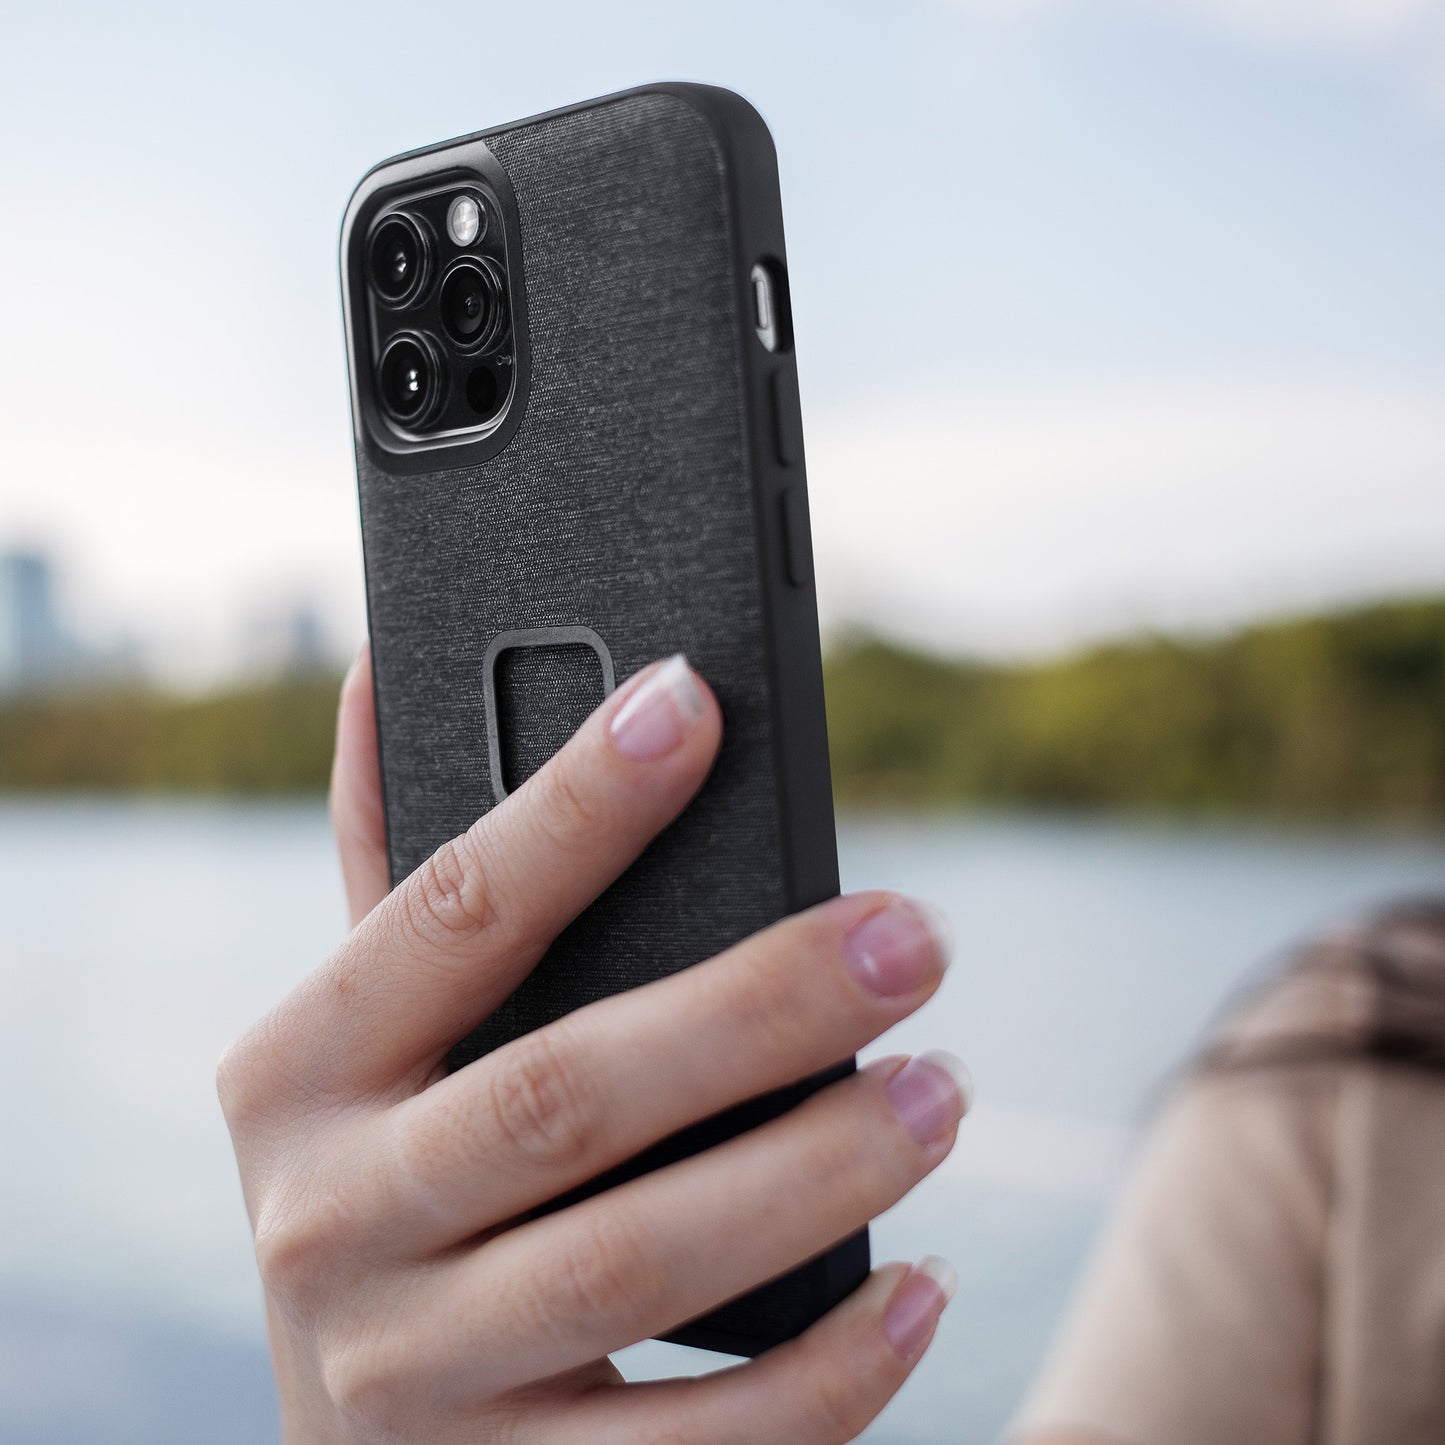 Smartphone-Hülle mit Magnetsystem für iPhone 11 Pro Max - Charcoal